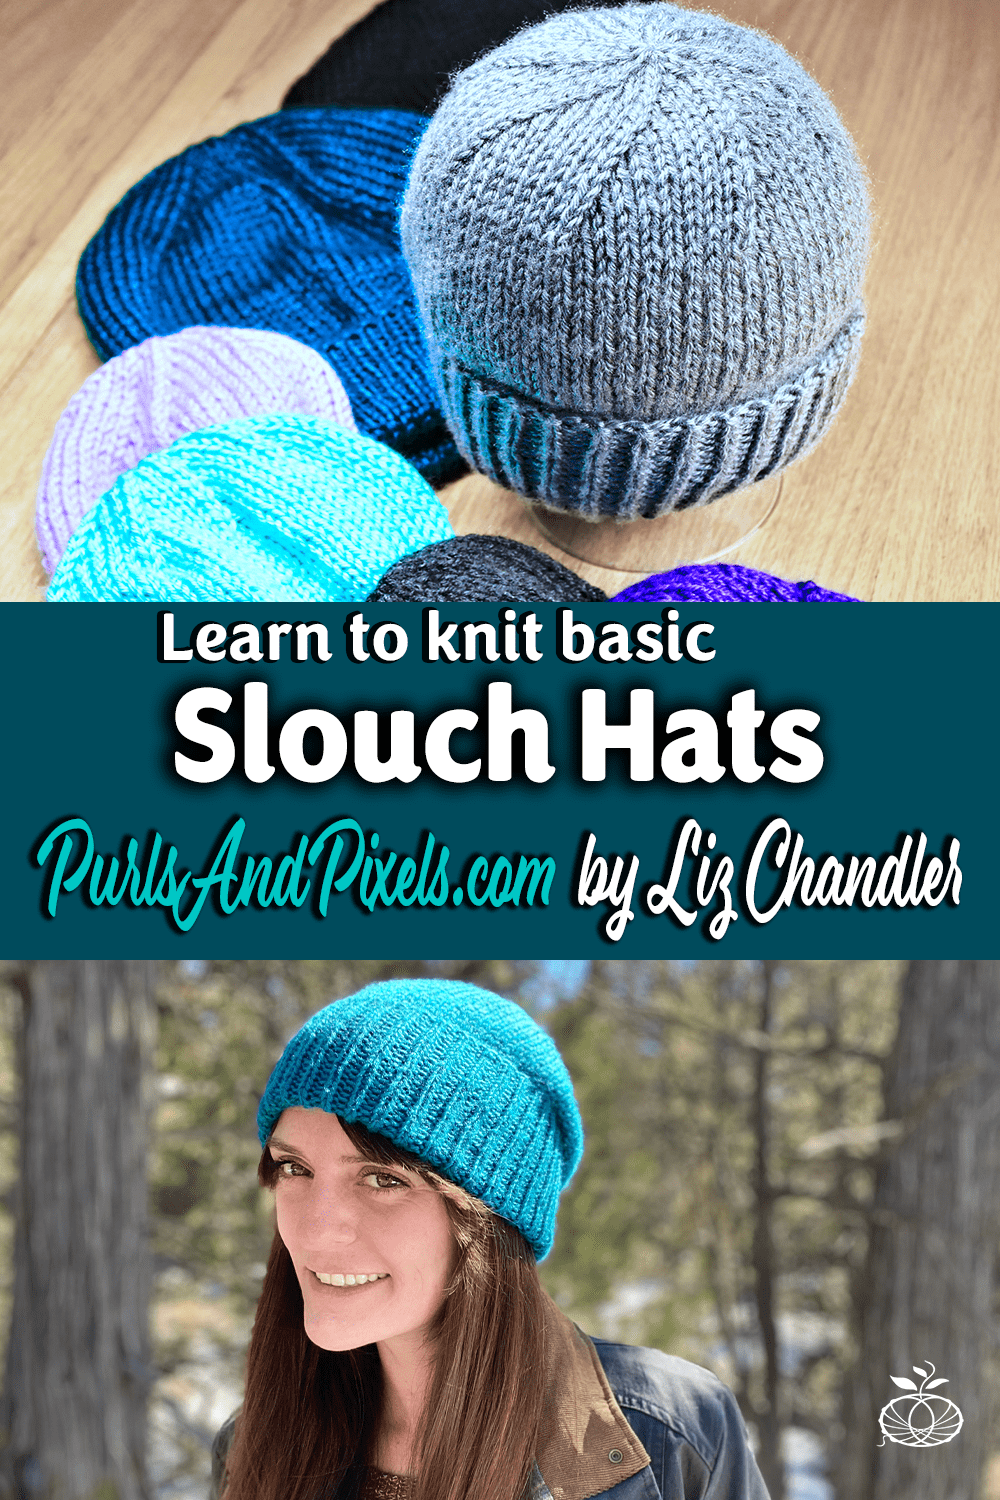 Basic Slouch Hat knitting pattern in all sizes by Liz Chandler @PurlsAndPixels.